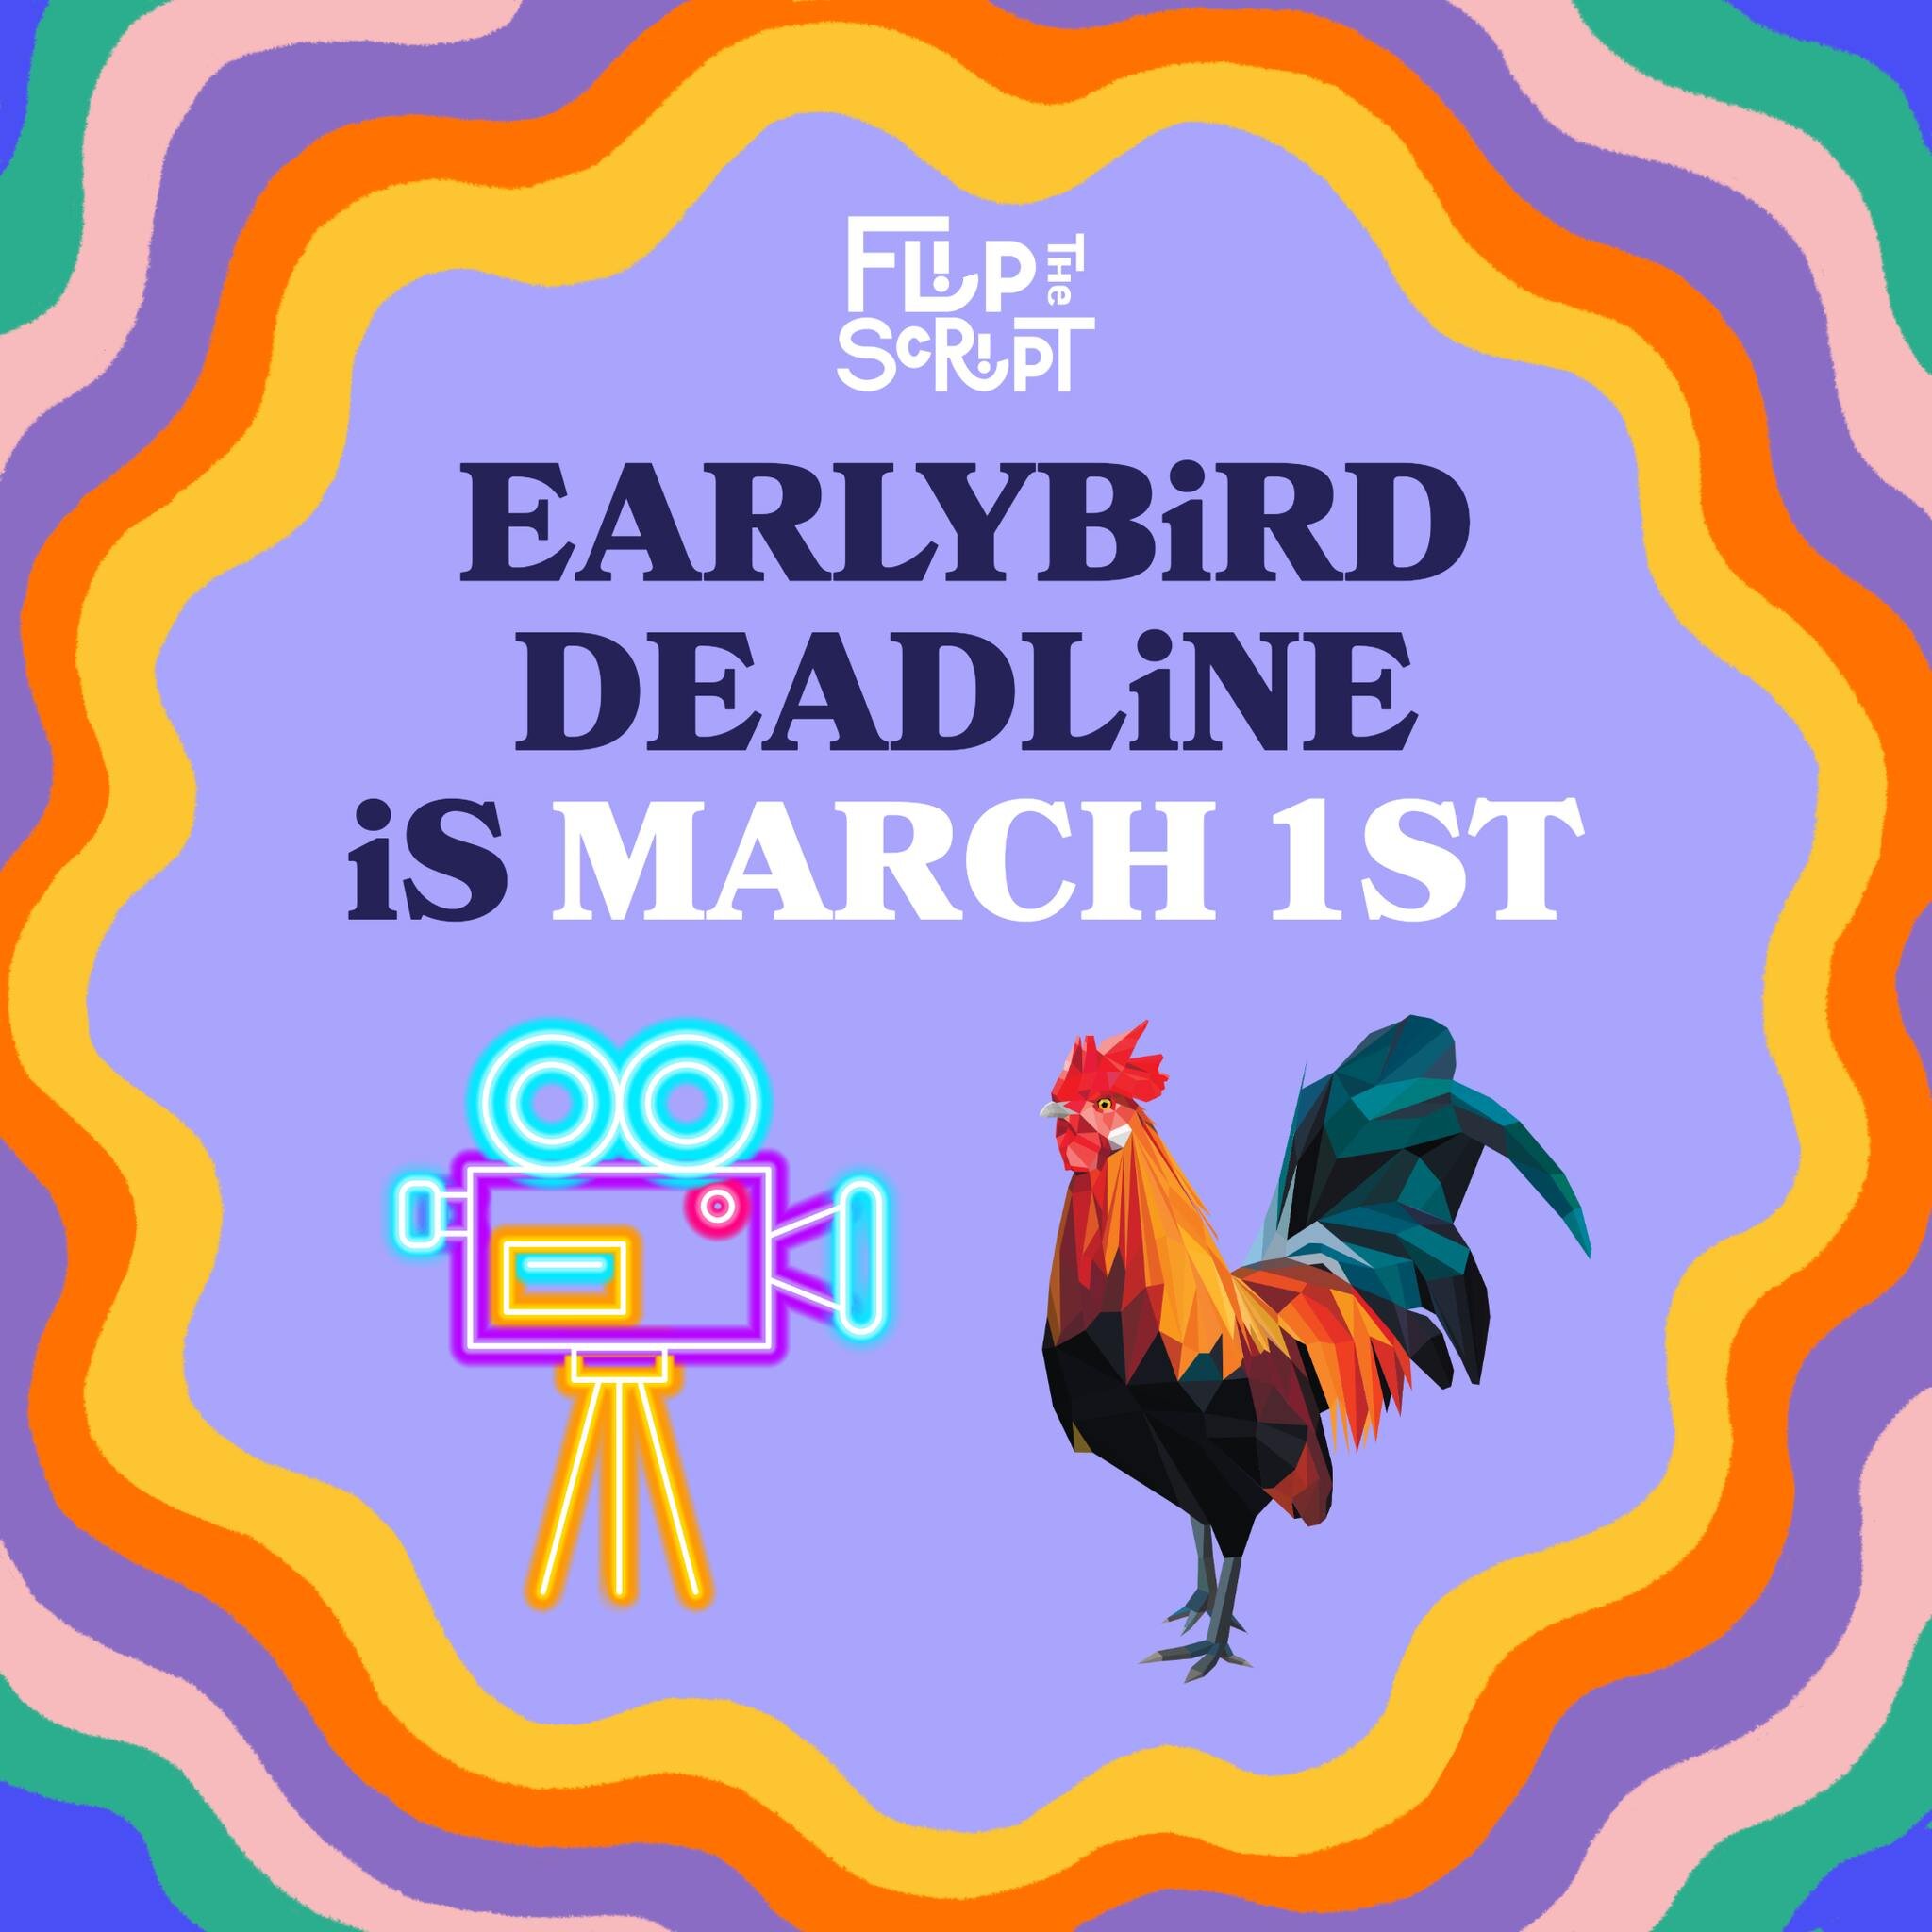 Our Earlybird Deadline is approaching which makes now a perfect time to submit your films to Flip the Script&rsquo;s 5th annual Queer Film Festival! Documentary, Narrative, Experimental, Animation &ndash; we want to see them all! #linkinbio

Send us 